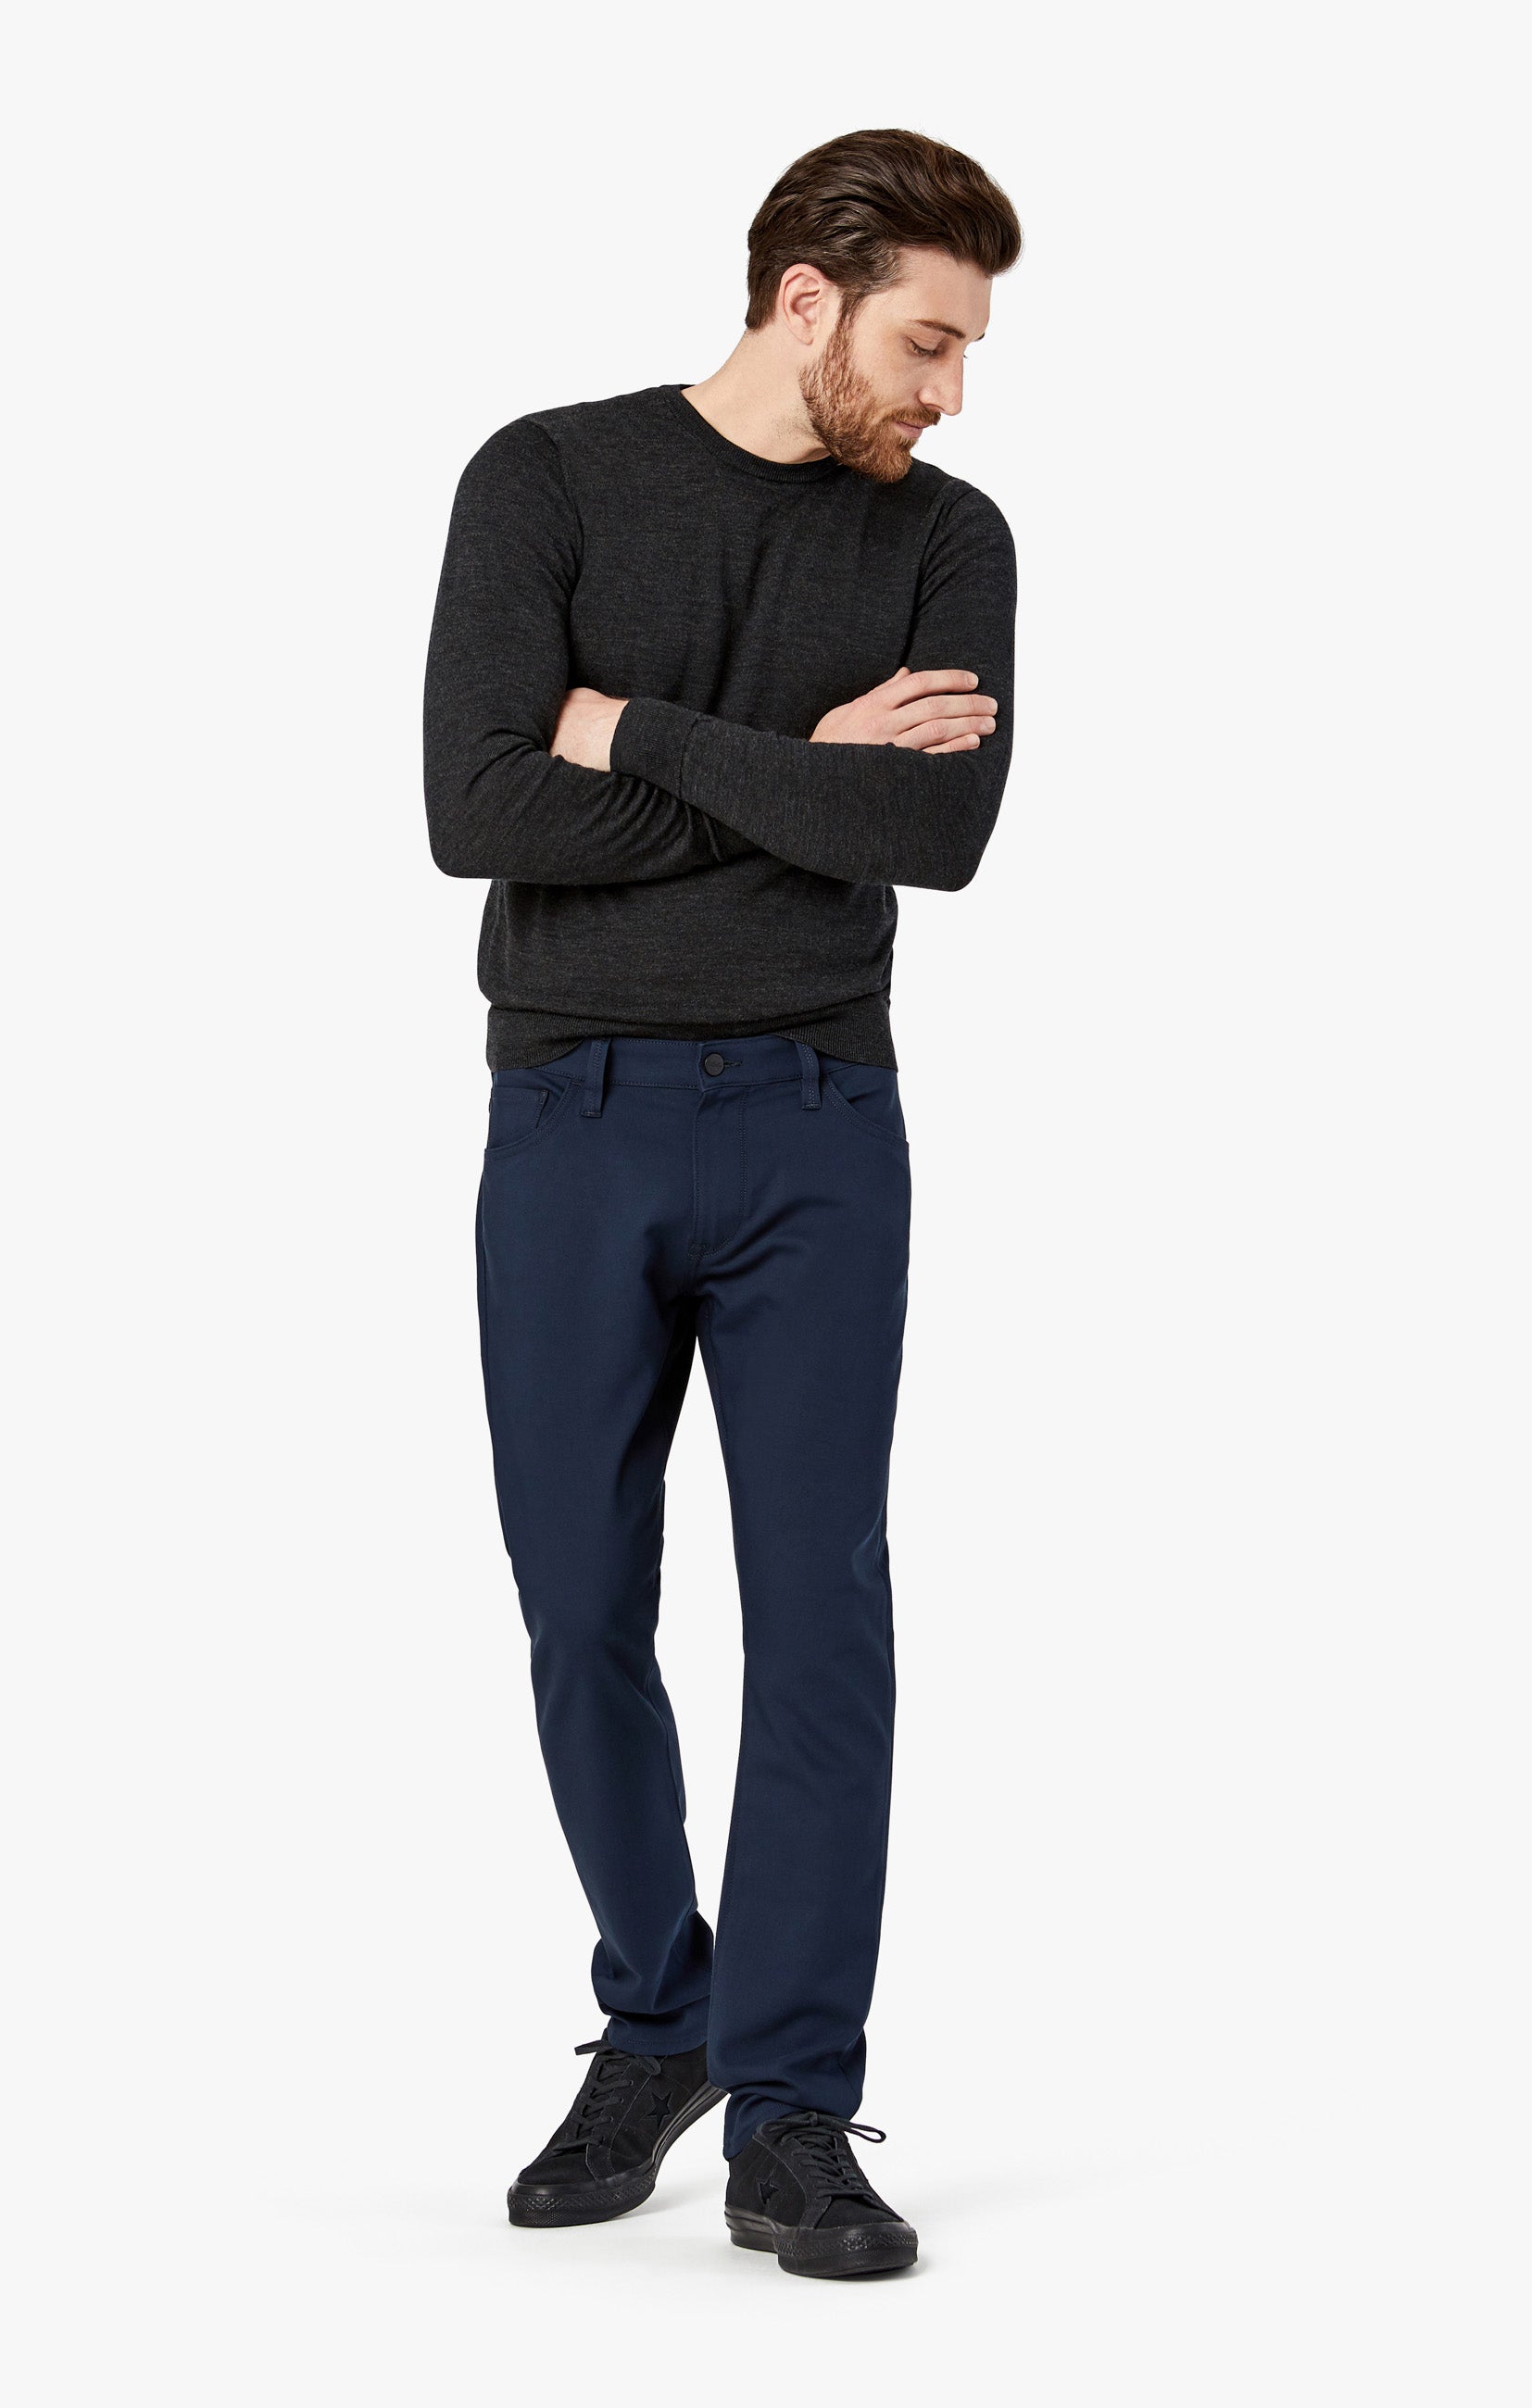 Courage Straight Leg Pants in Navy Commuter Image 2